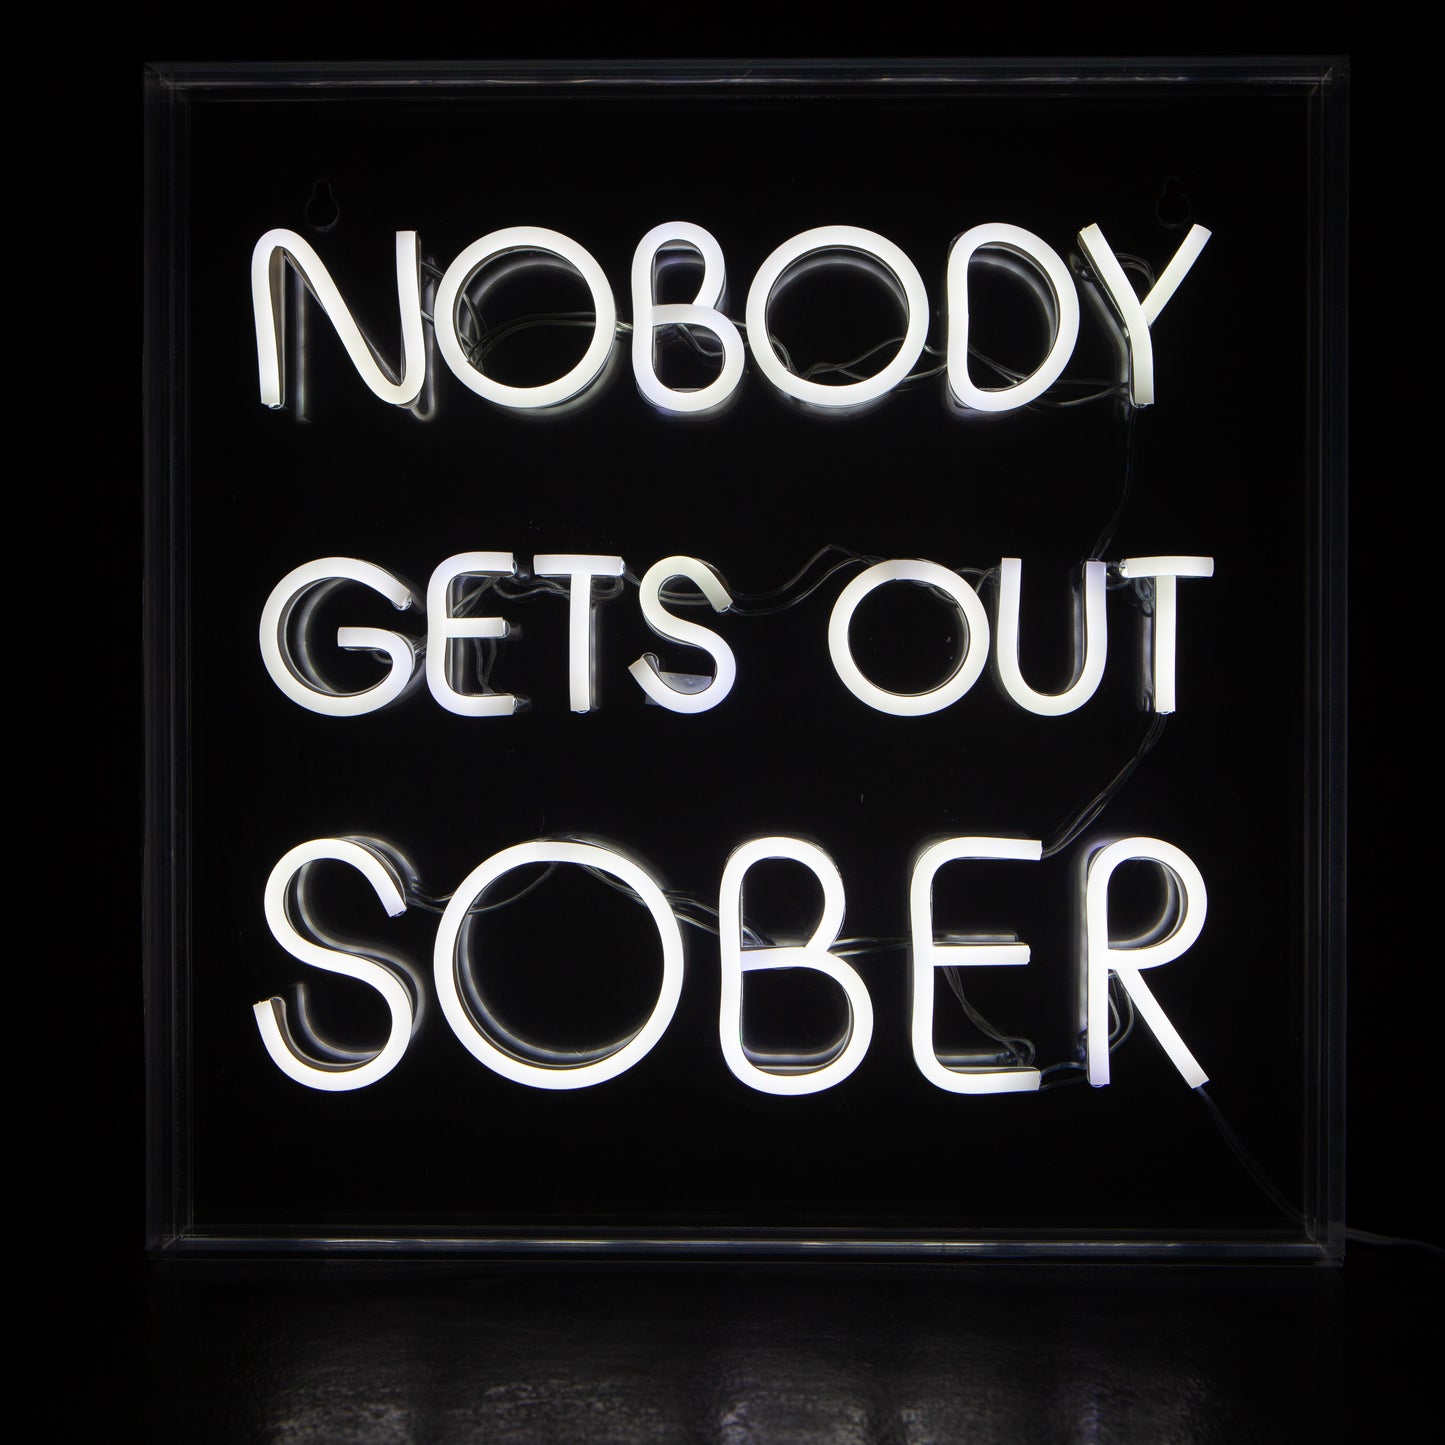 Neon light box [Nobody Gets Out Sober]